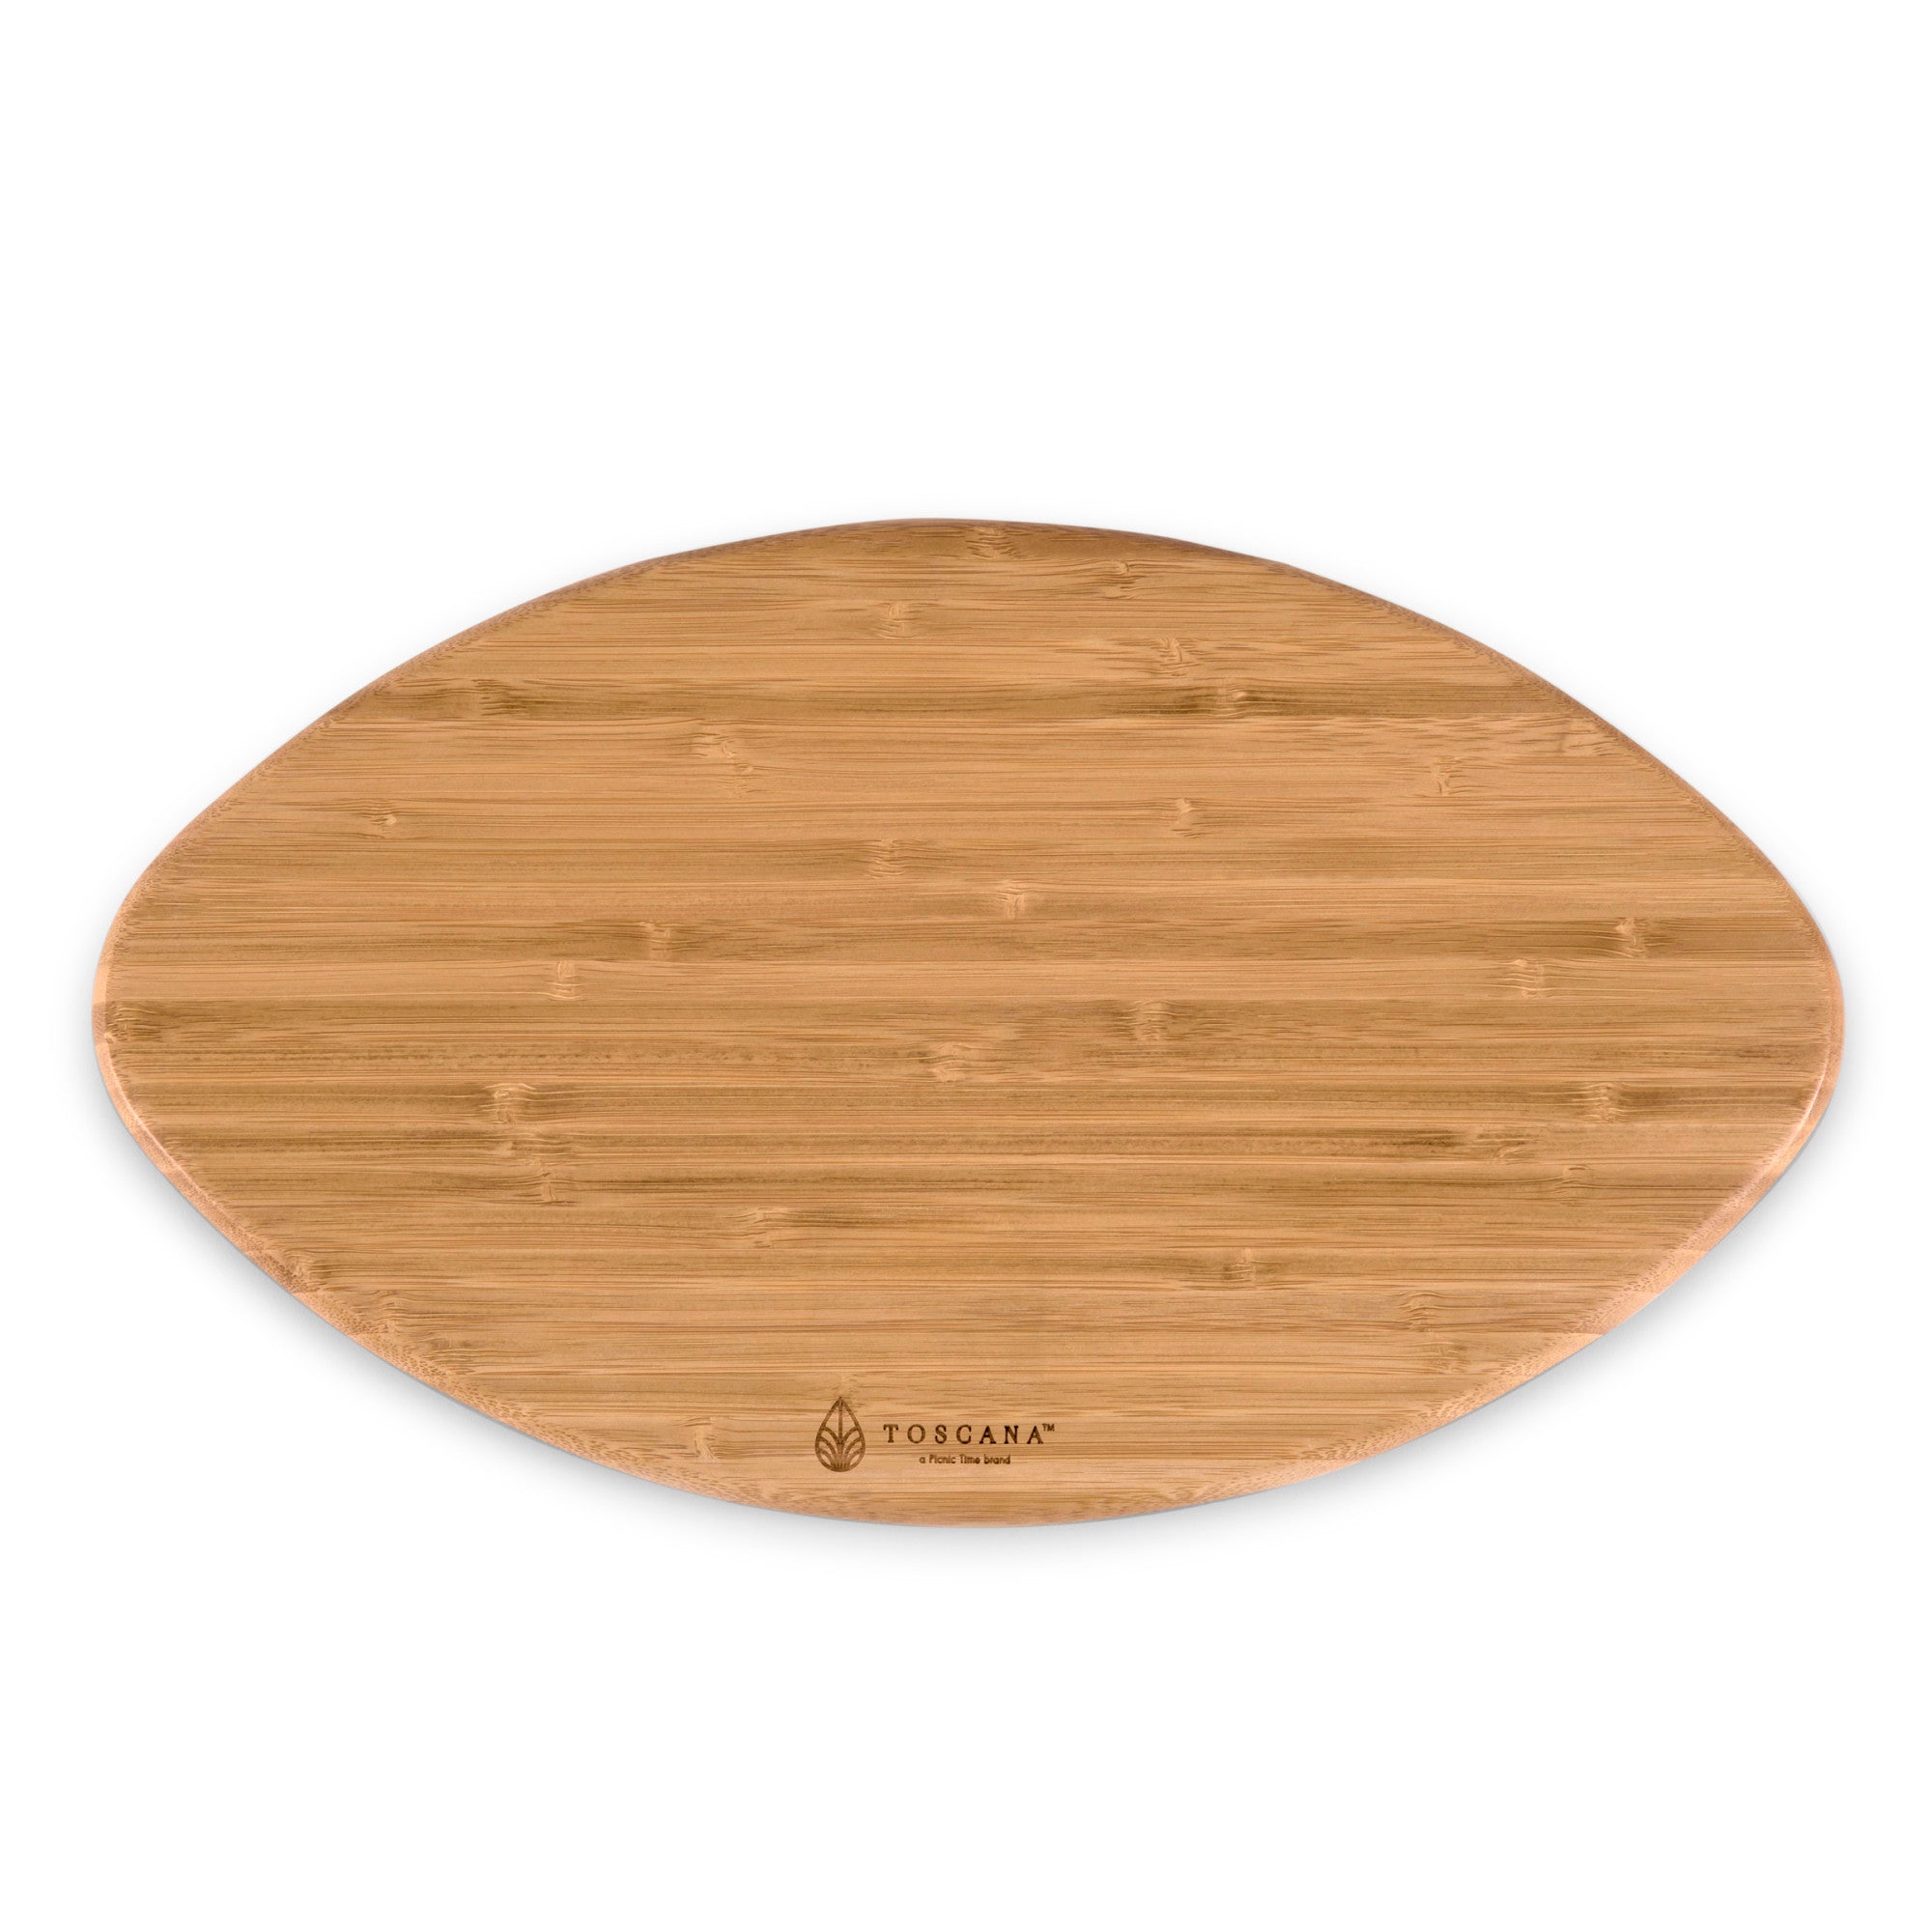 Oregon State Beavers - Touchdown! Football Cutting Board & Serving Tray